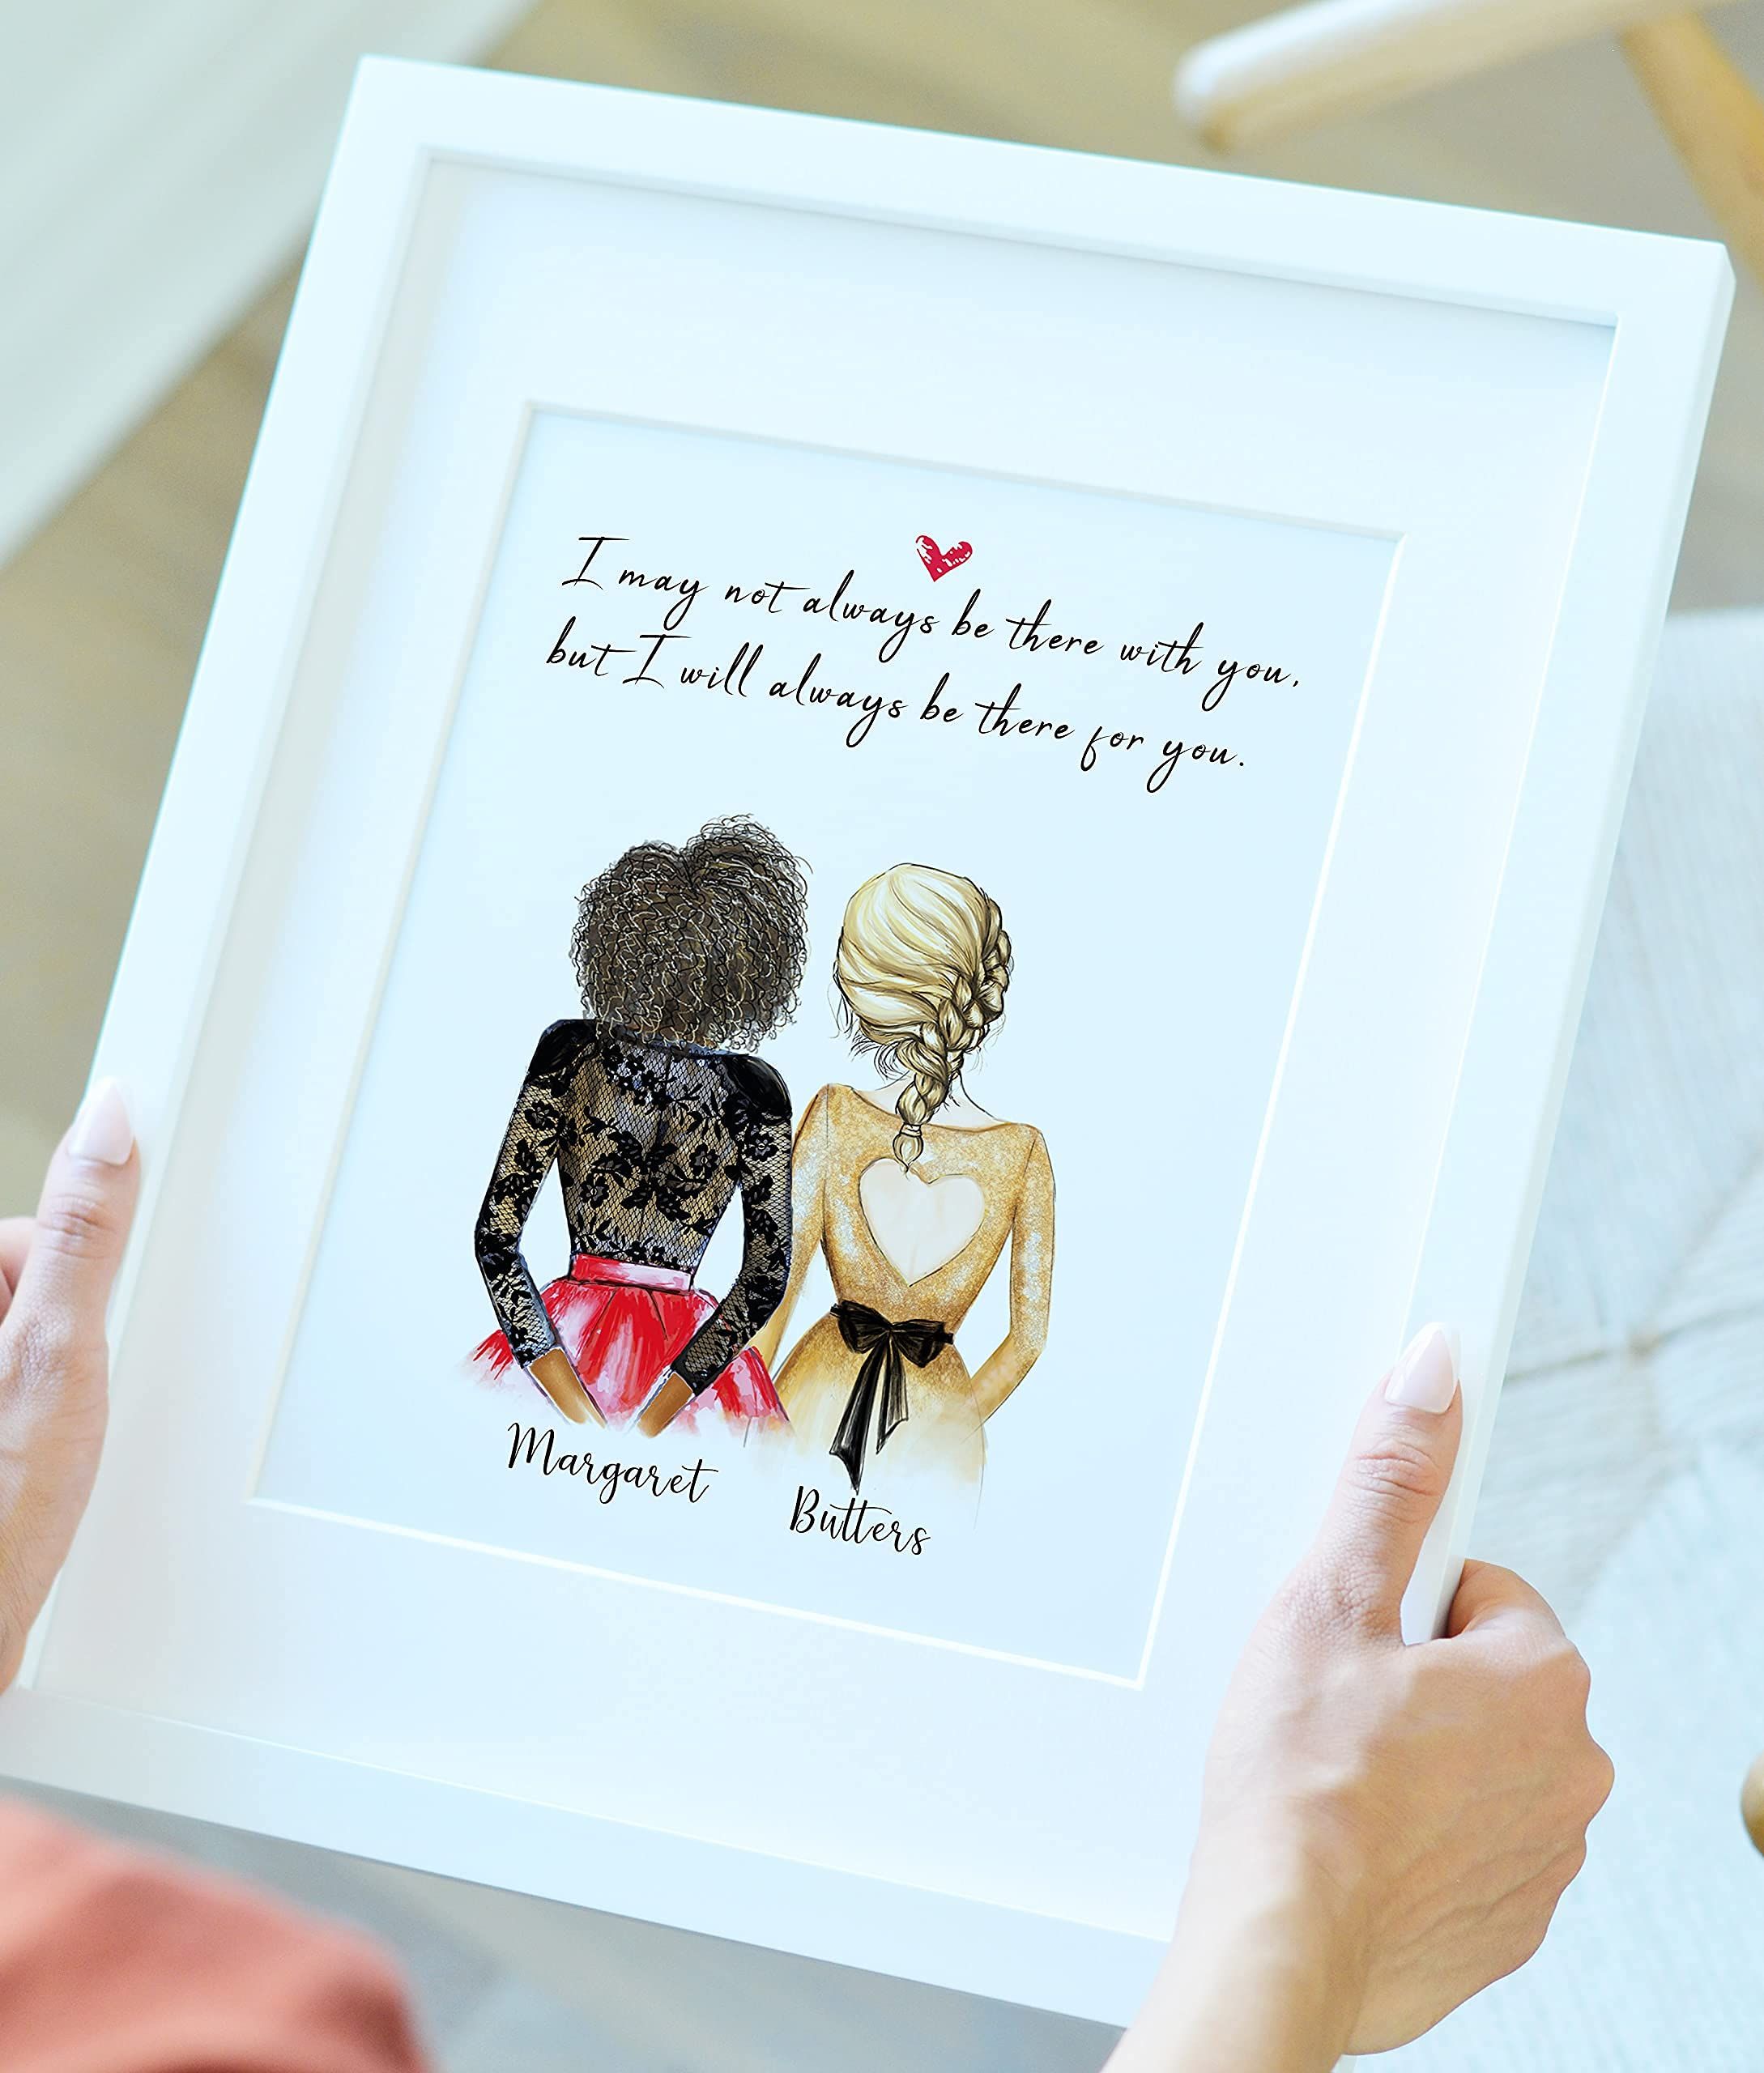 50 Unique Best Friend Gifts - Touching Gifts for BFFs